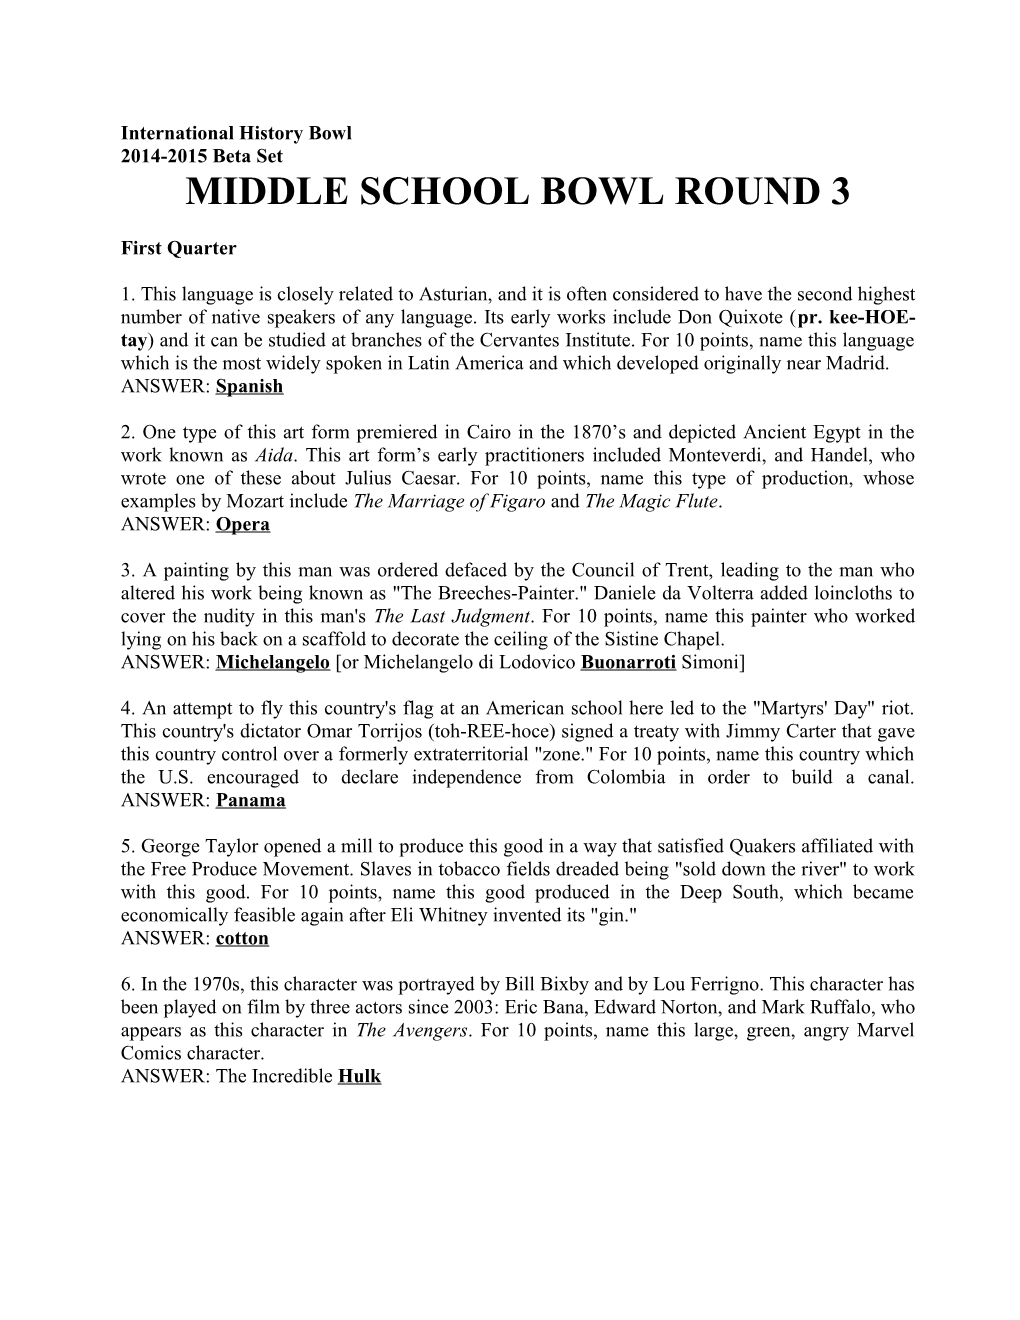 Middle School Bowl Round 3